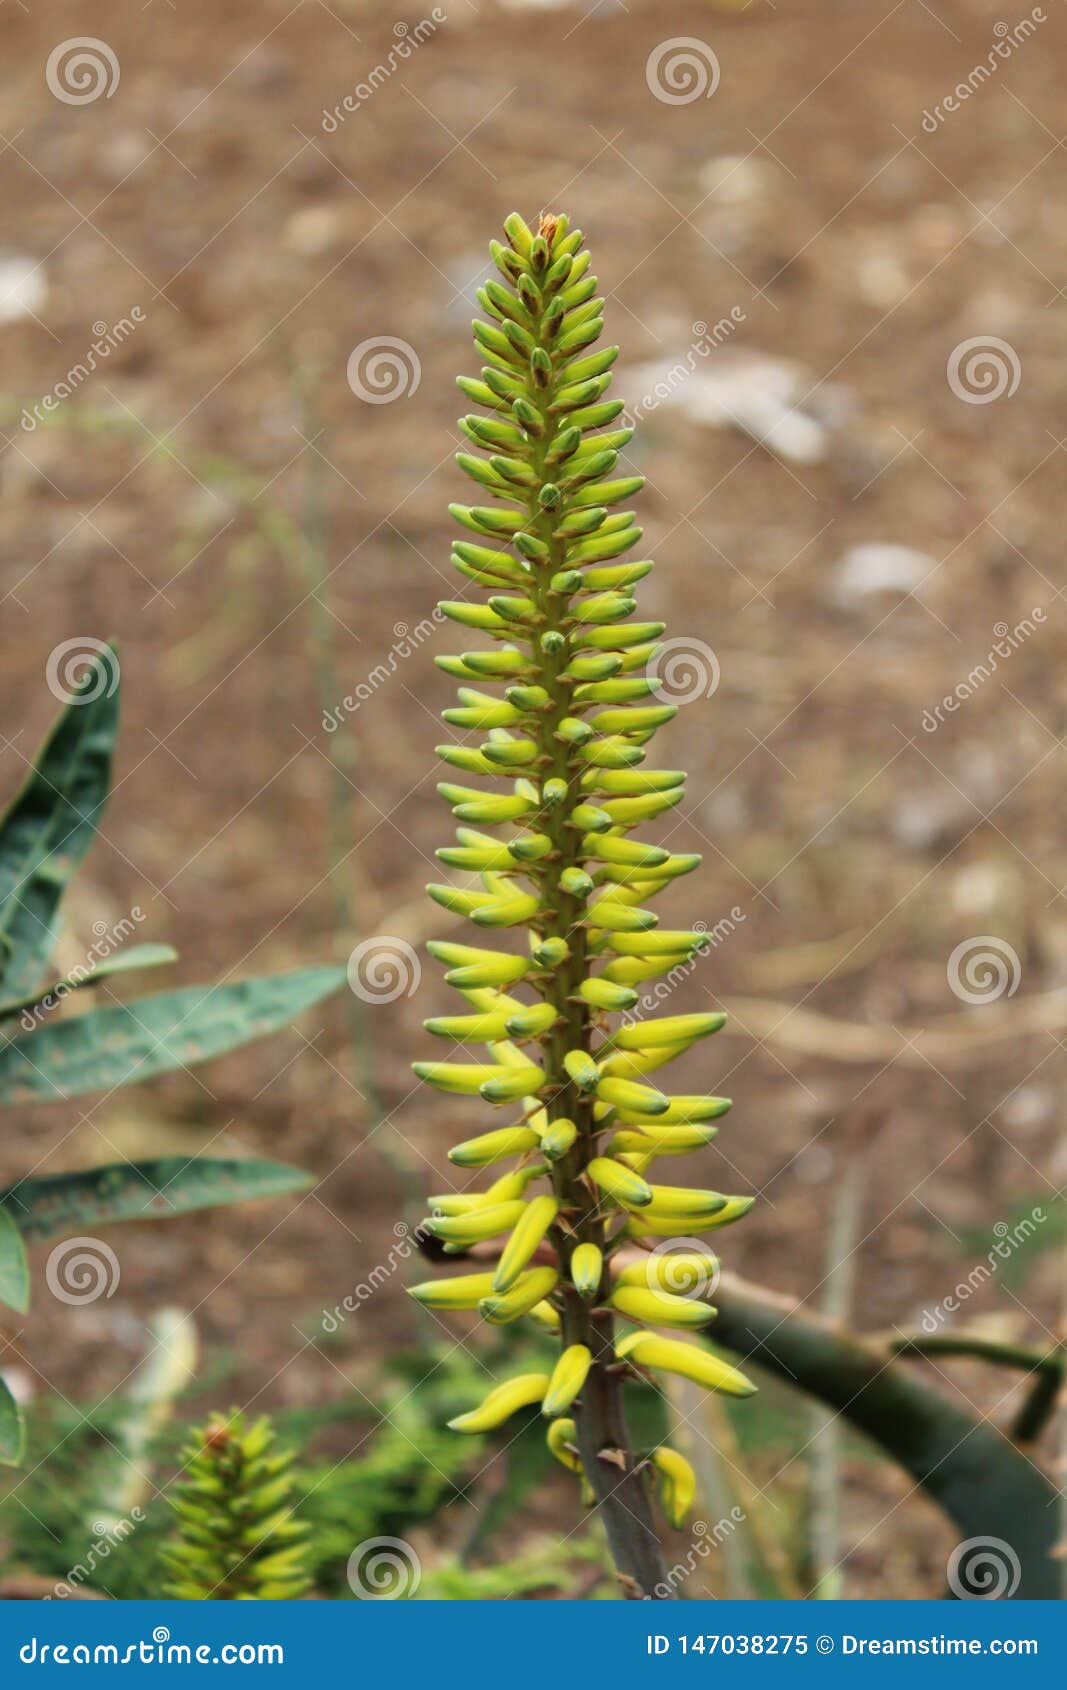 plant at tenerife, canary islands